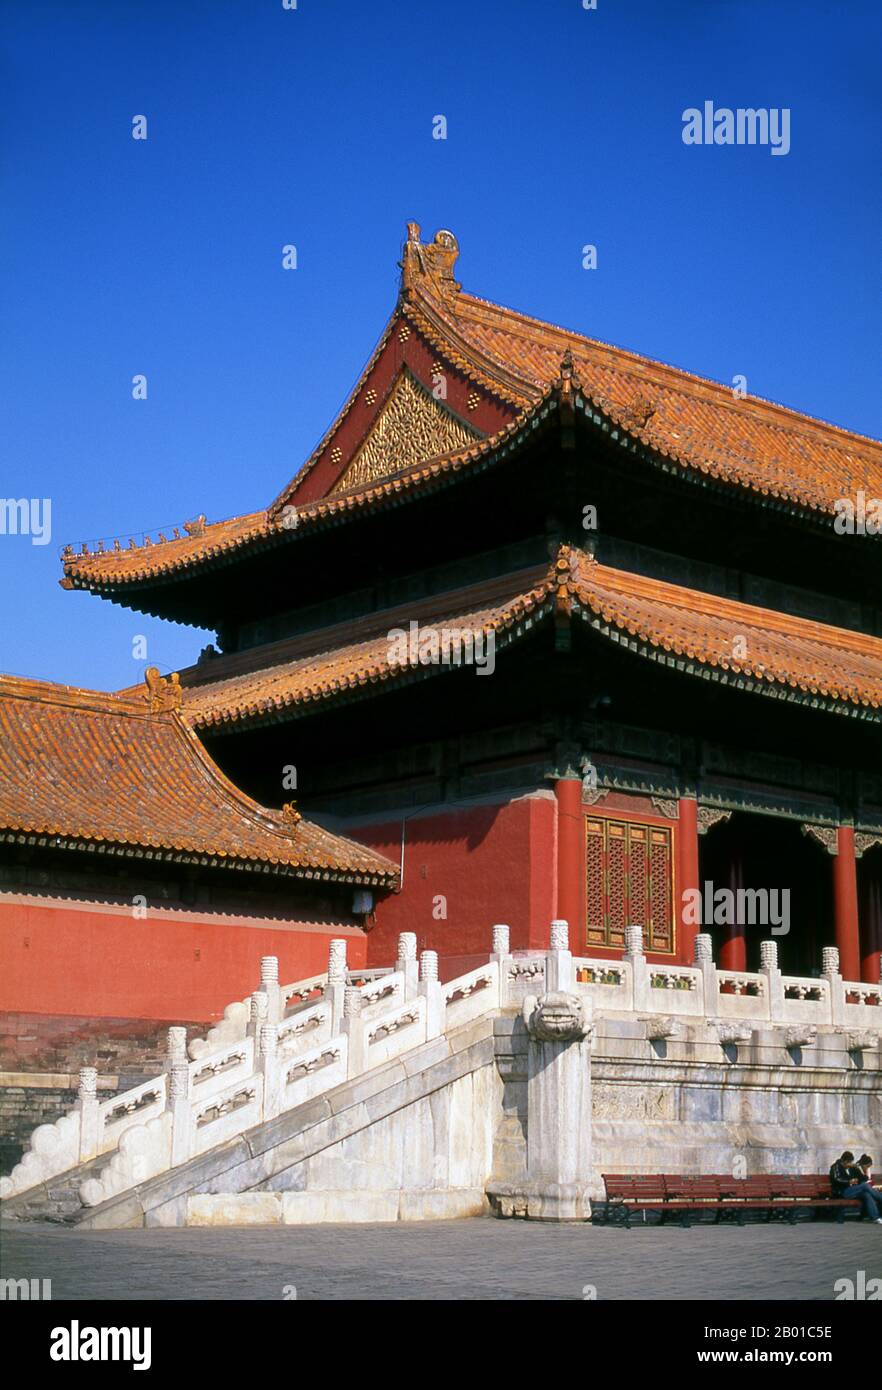 China: Gate of Supreme Harmony, The Forbidden City (Zijin Cheng), Beijing.  The Gate of Supreme Harmony (pinyin: Tàihémén; Manchu: Amba hūwaliyambure duka), is the second major gate at the southern side of the Forbidden City.  The Forbidden City, built between 1406 and 1420, served for 500 years (until the end of the imperial era in 1911) as the seat of all power in China, the throne of the Son of Heaven and the private residence of all the Ming and Qing dynasty emperors. The complex consists of 980 buildings with 8,707 bays of rooms and covers 720,000 sq m (7,800,000 sq ft). Stock Photo